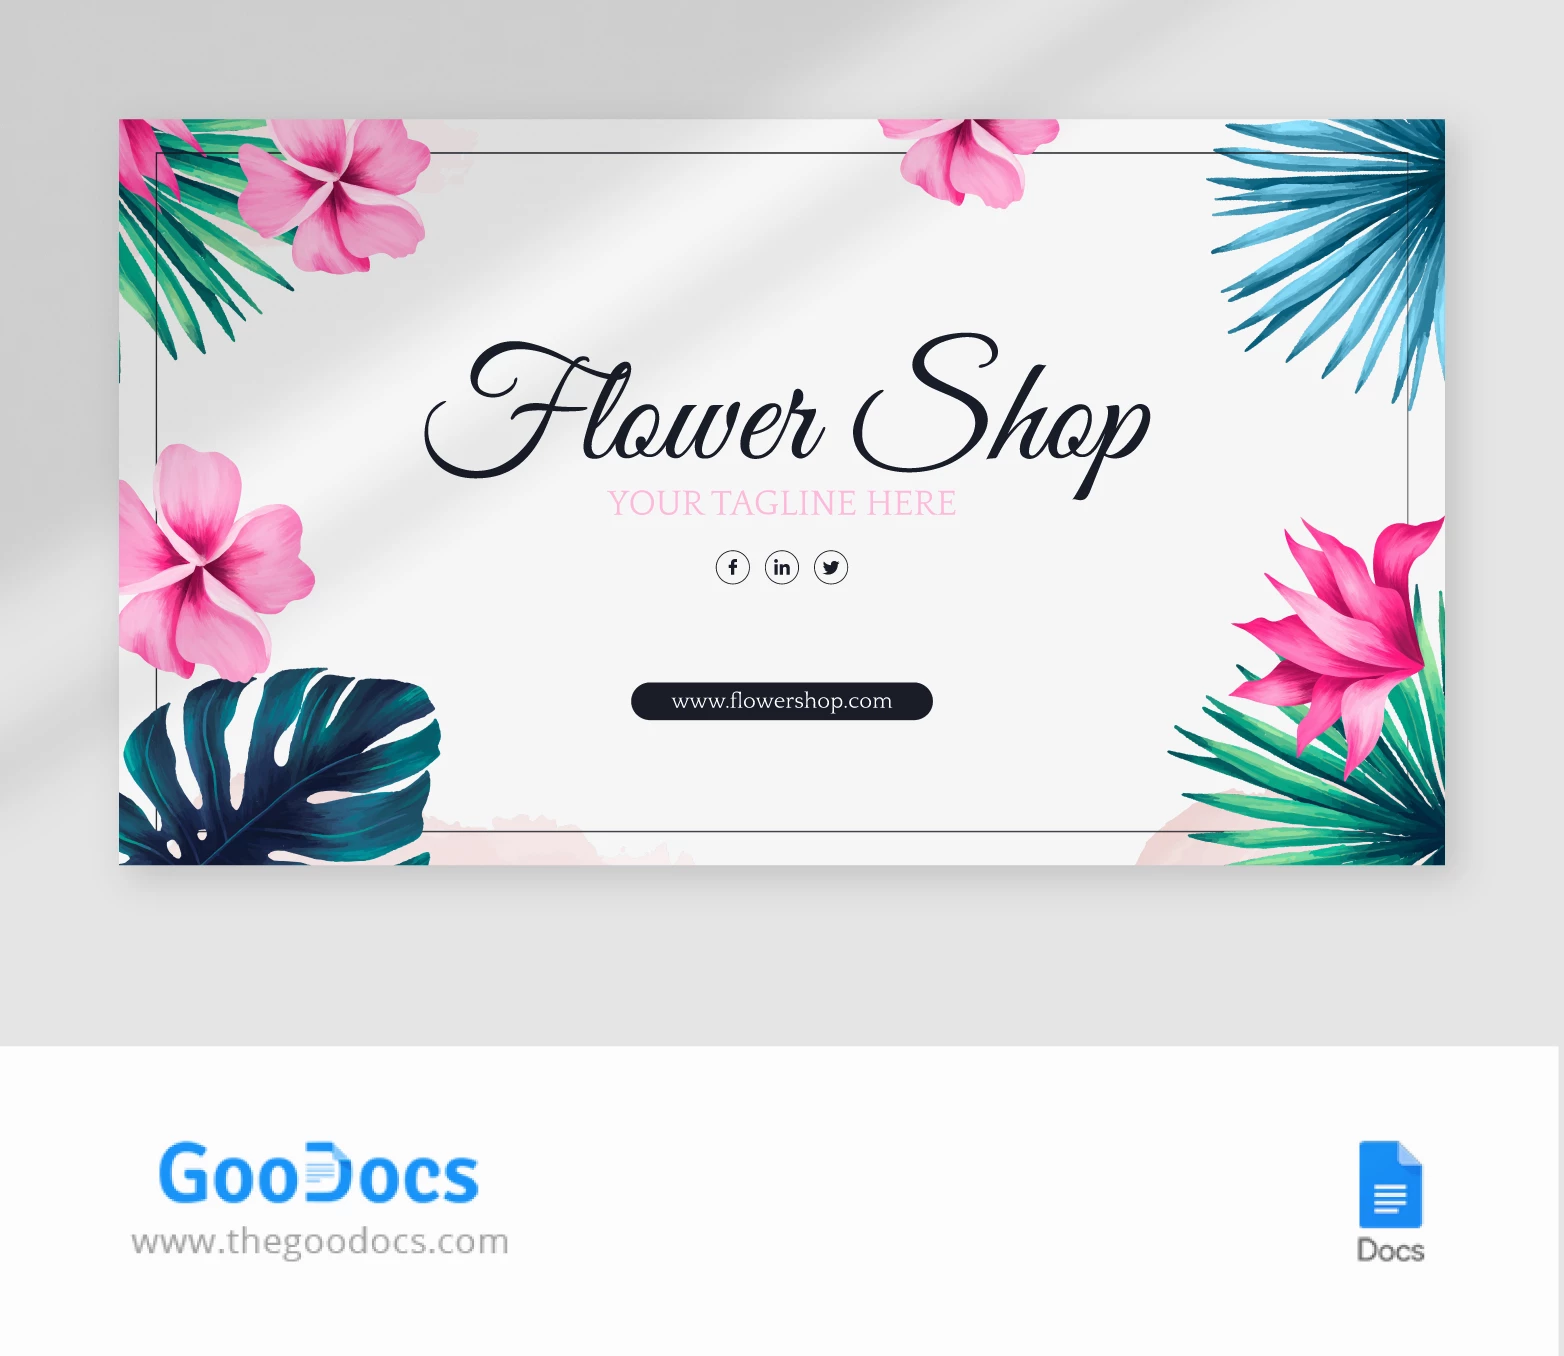 Floral Facebook Cover - free Google Docs Template - 10067665